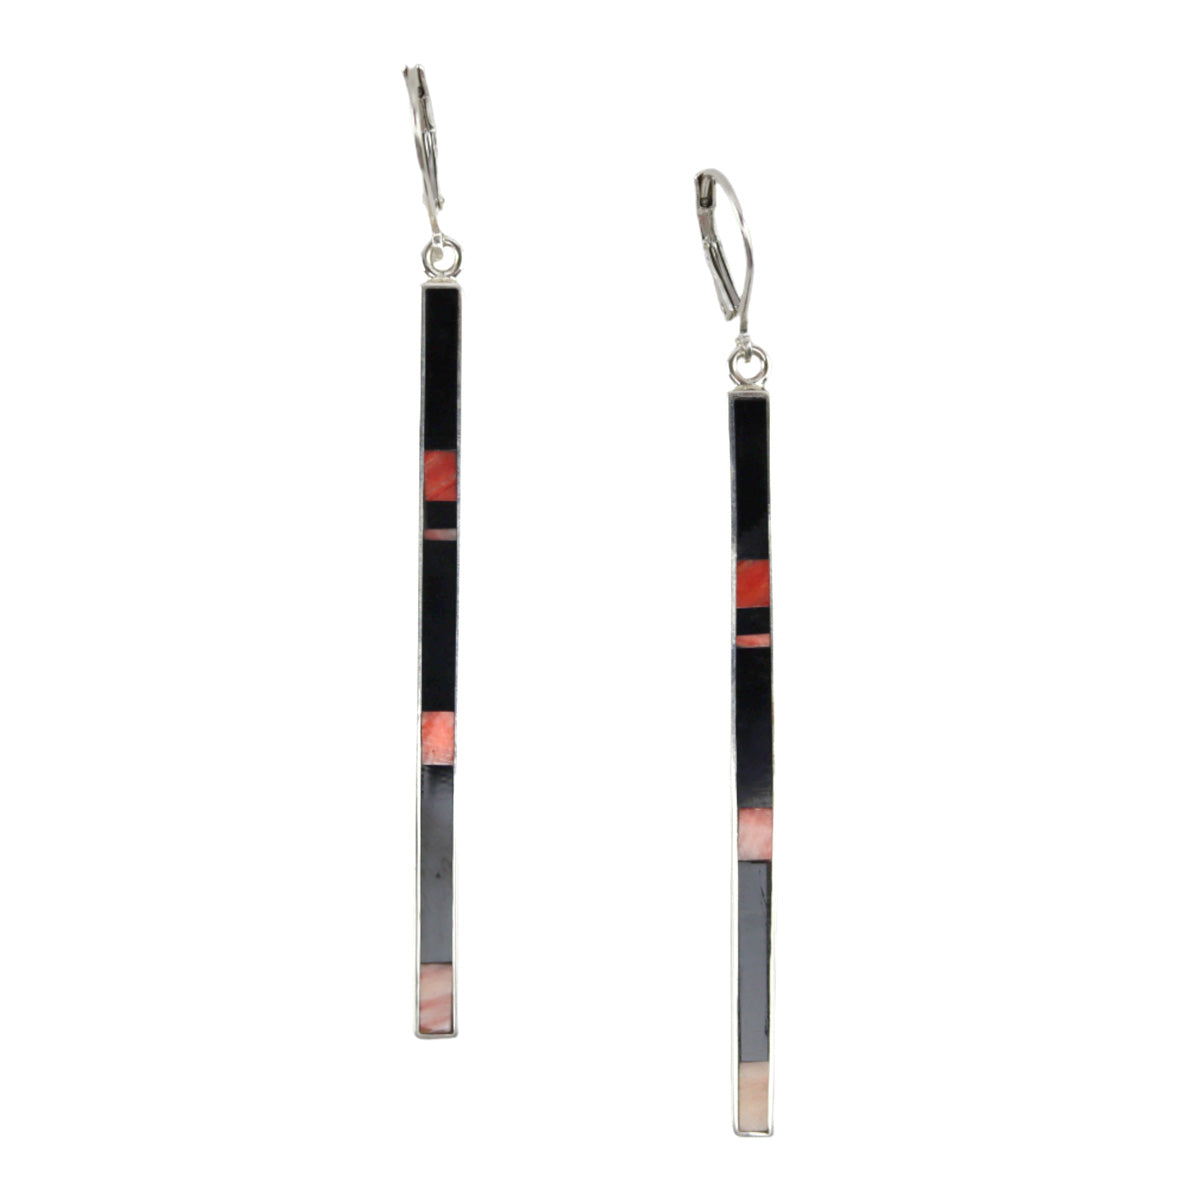 Veronica Benally - Navajo - Contemporary Jet, Coral, and Sterling Silver Hook Earrings, 2.875" x 0.125" (J16046-006)